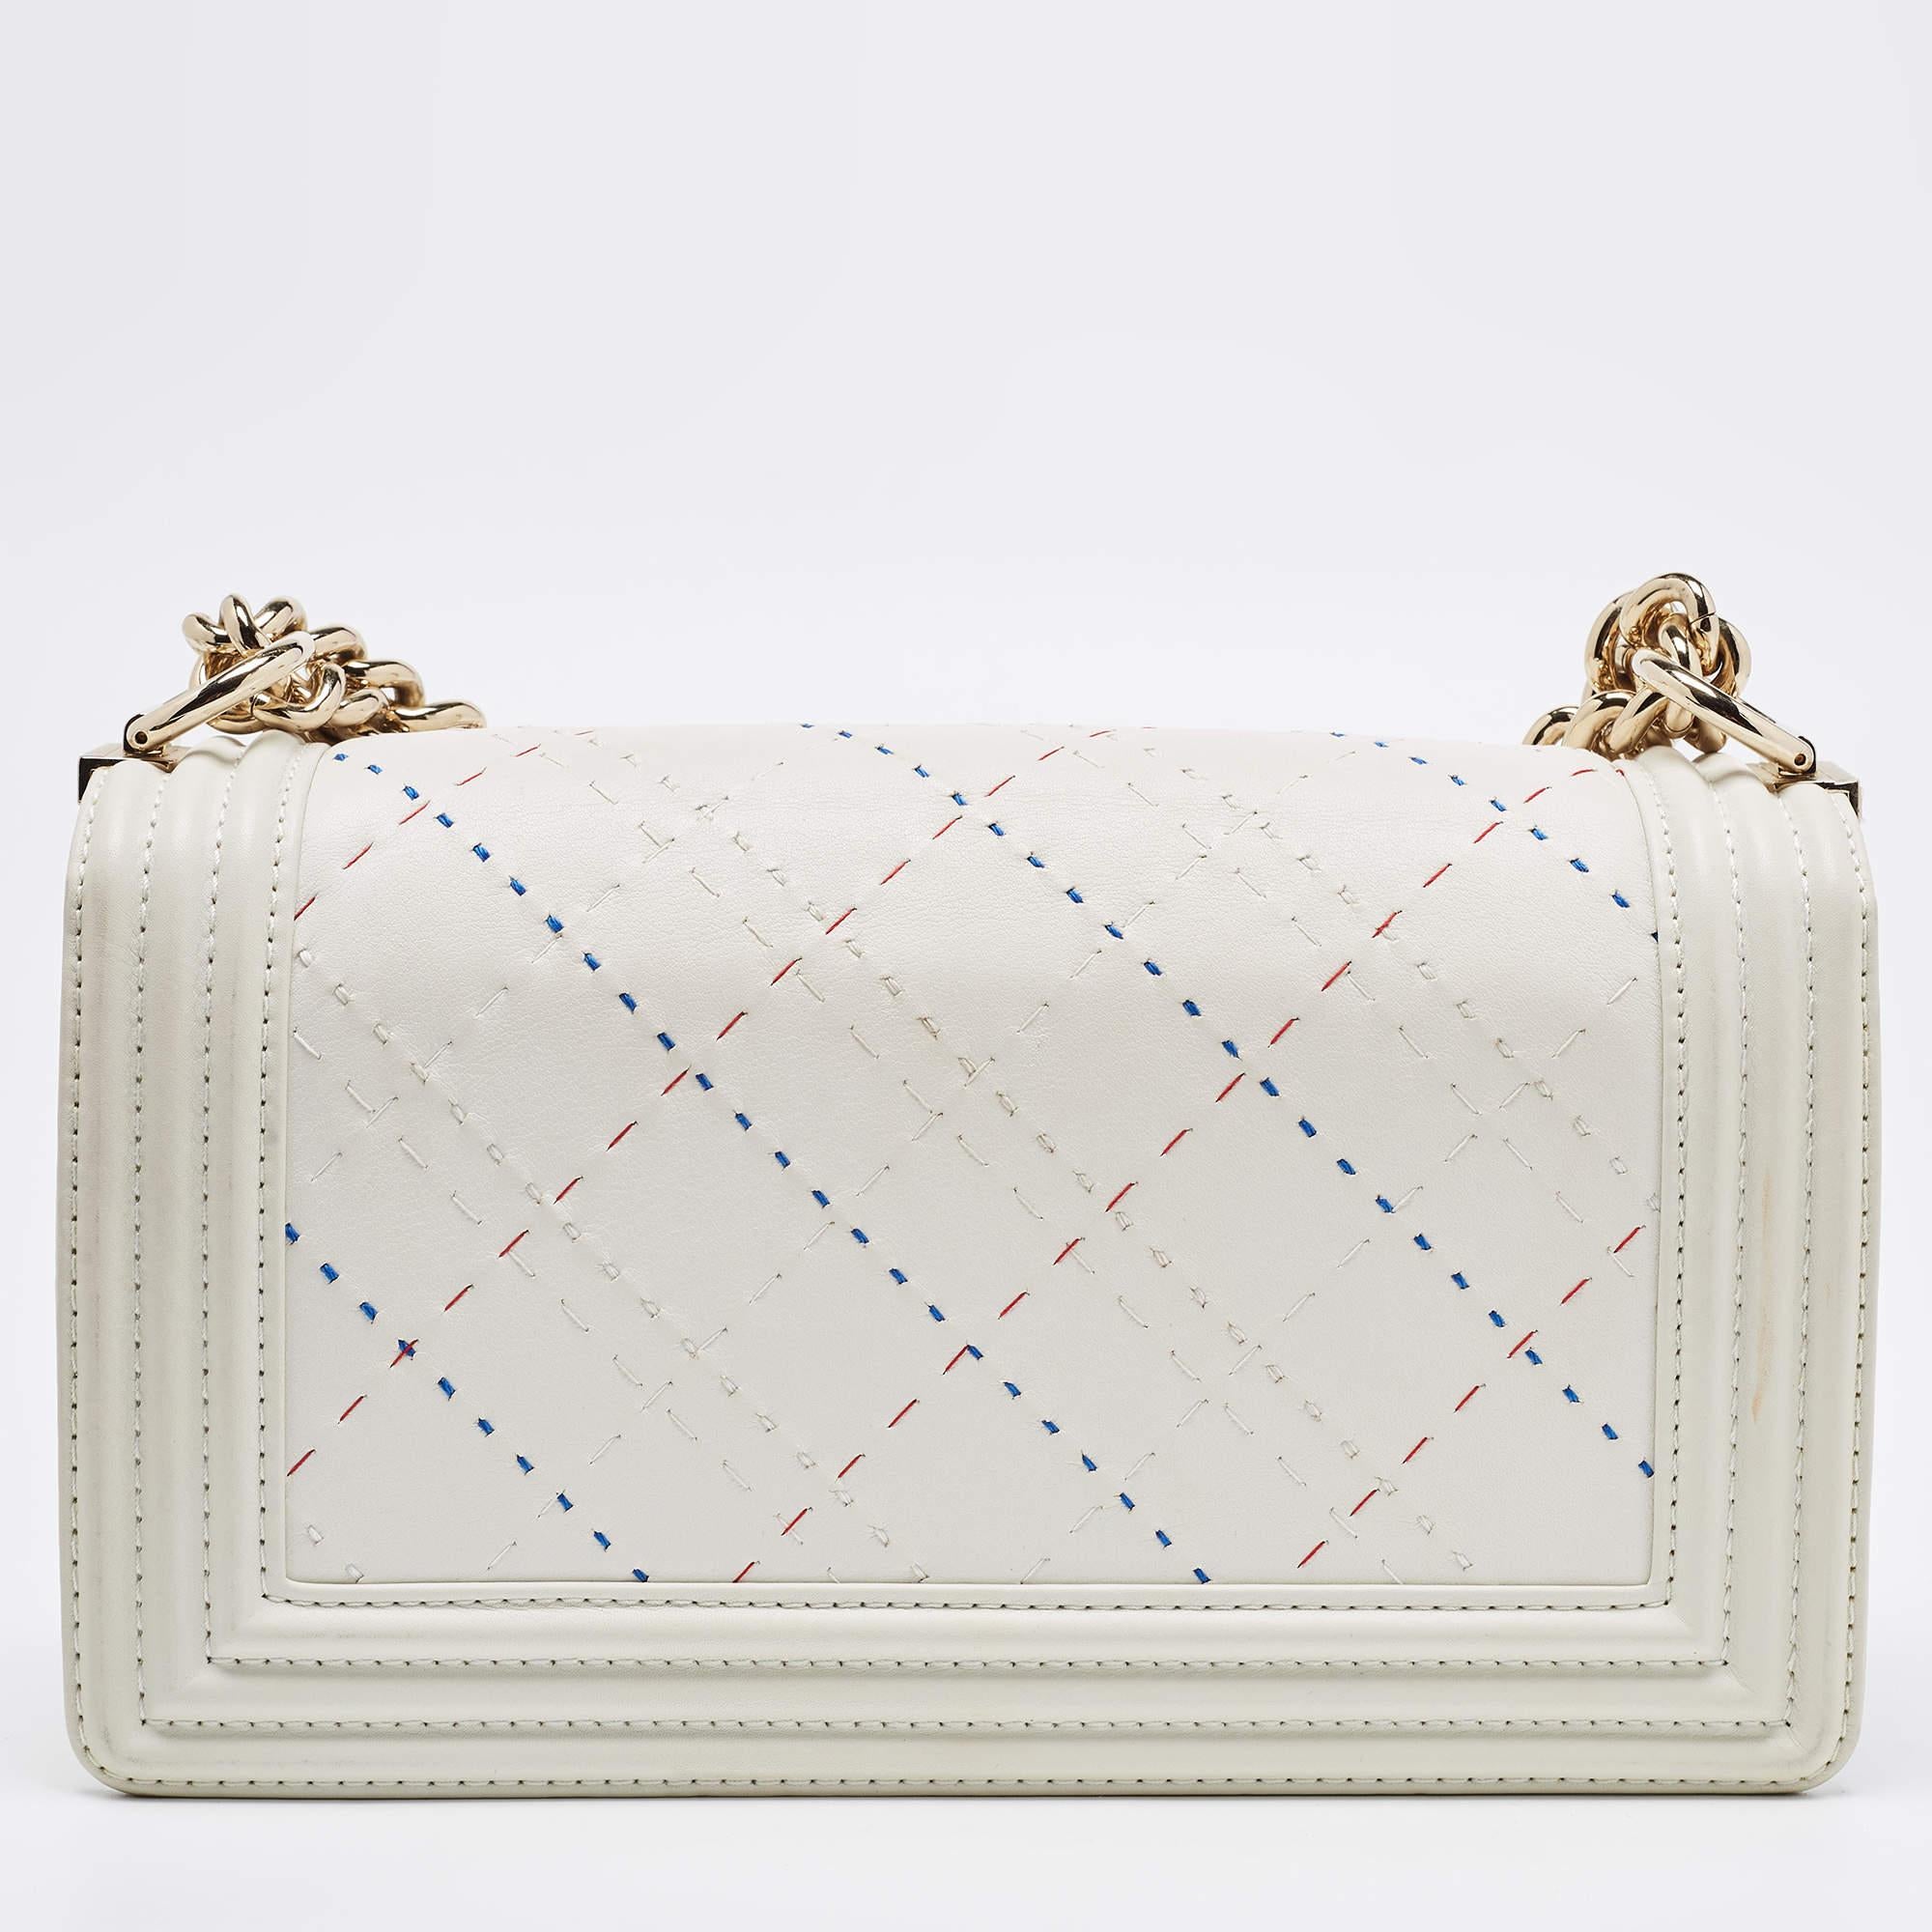 Chanel White Stitch Quilted Leather Medium Boy Flap Bag For Sale 15